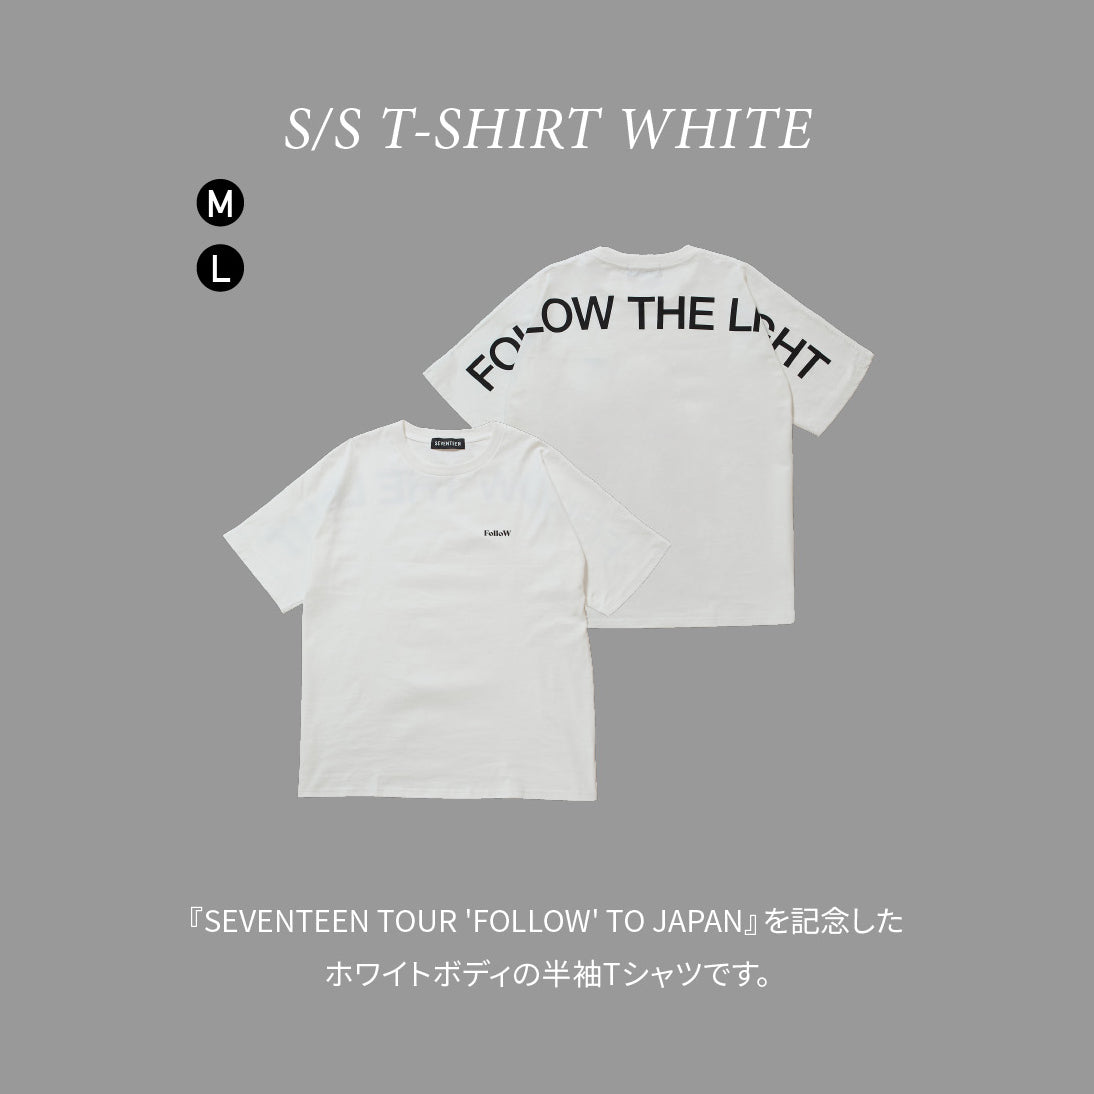 SEVENTEEN TOUR 'FOLLOW' TO JAPAN OFFICIAL MD - S/S T-SHIRT WHITE